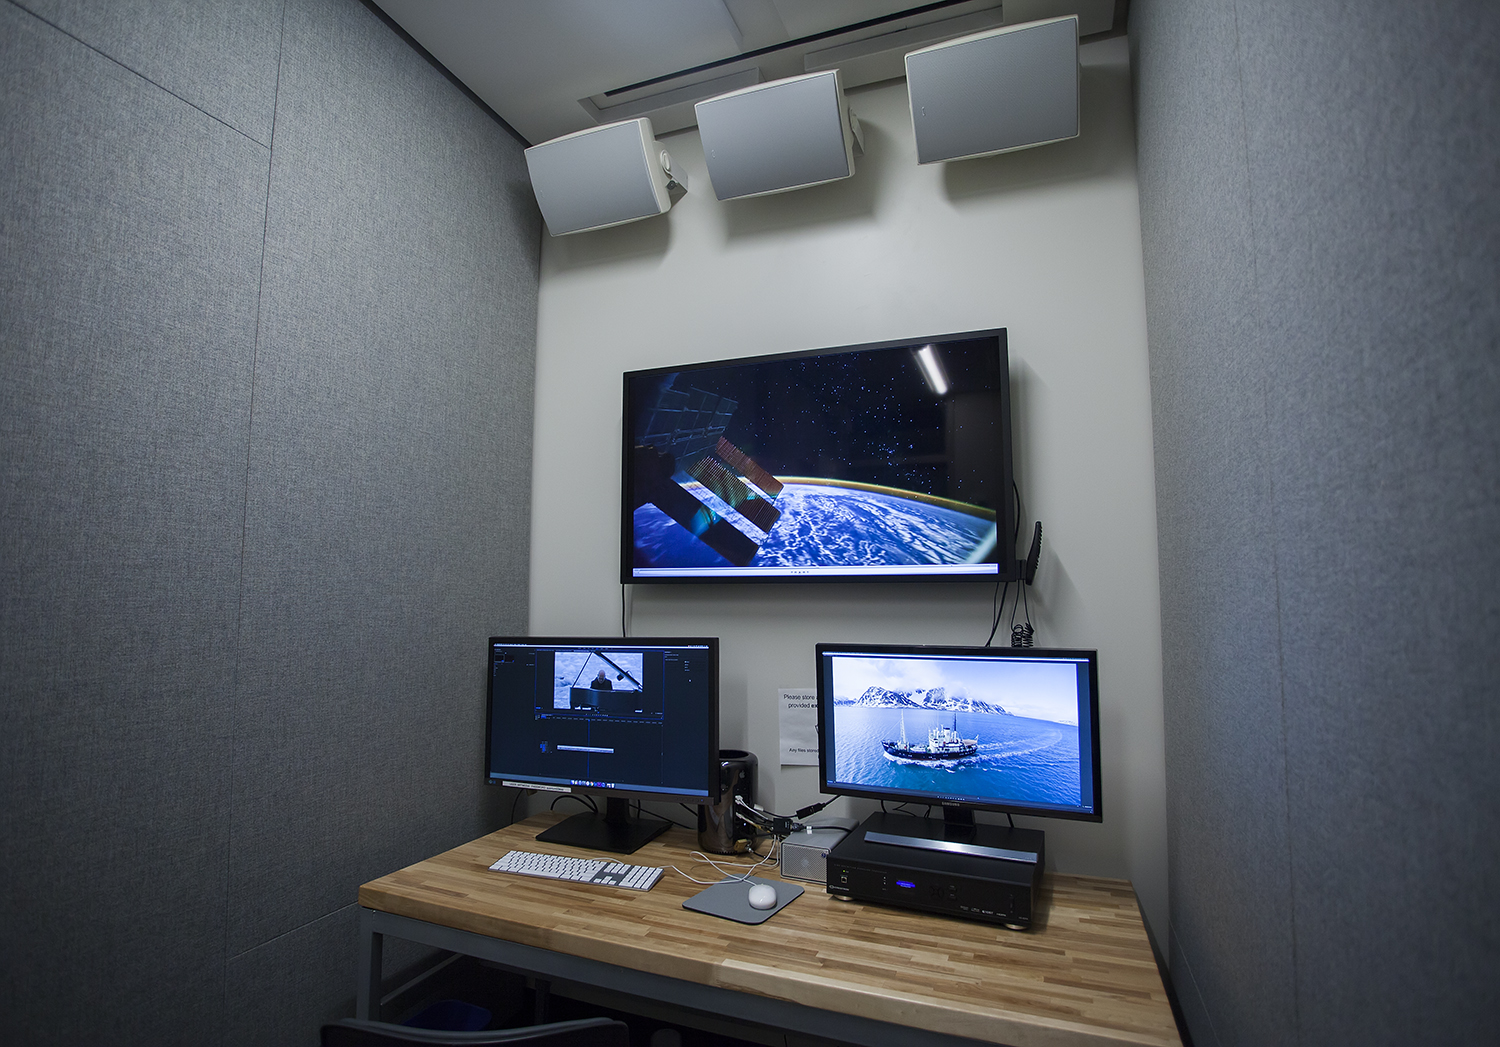 two computer monitors on a desk with one larger monitor on the wall behind them, three speakers mounted on the wall above that